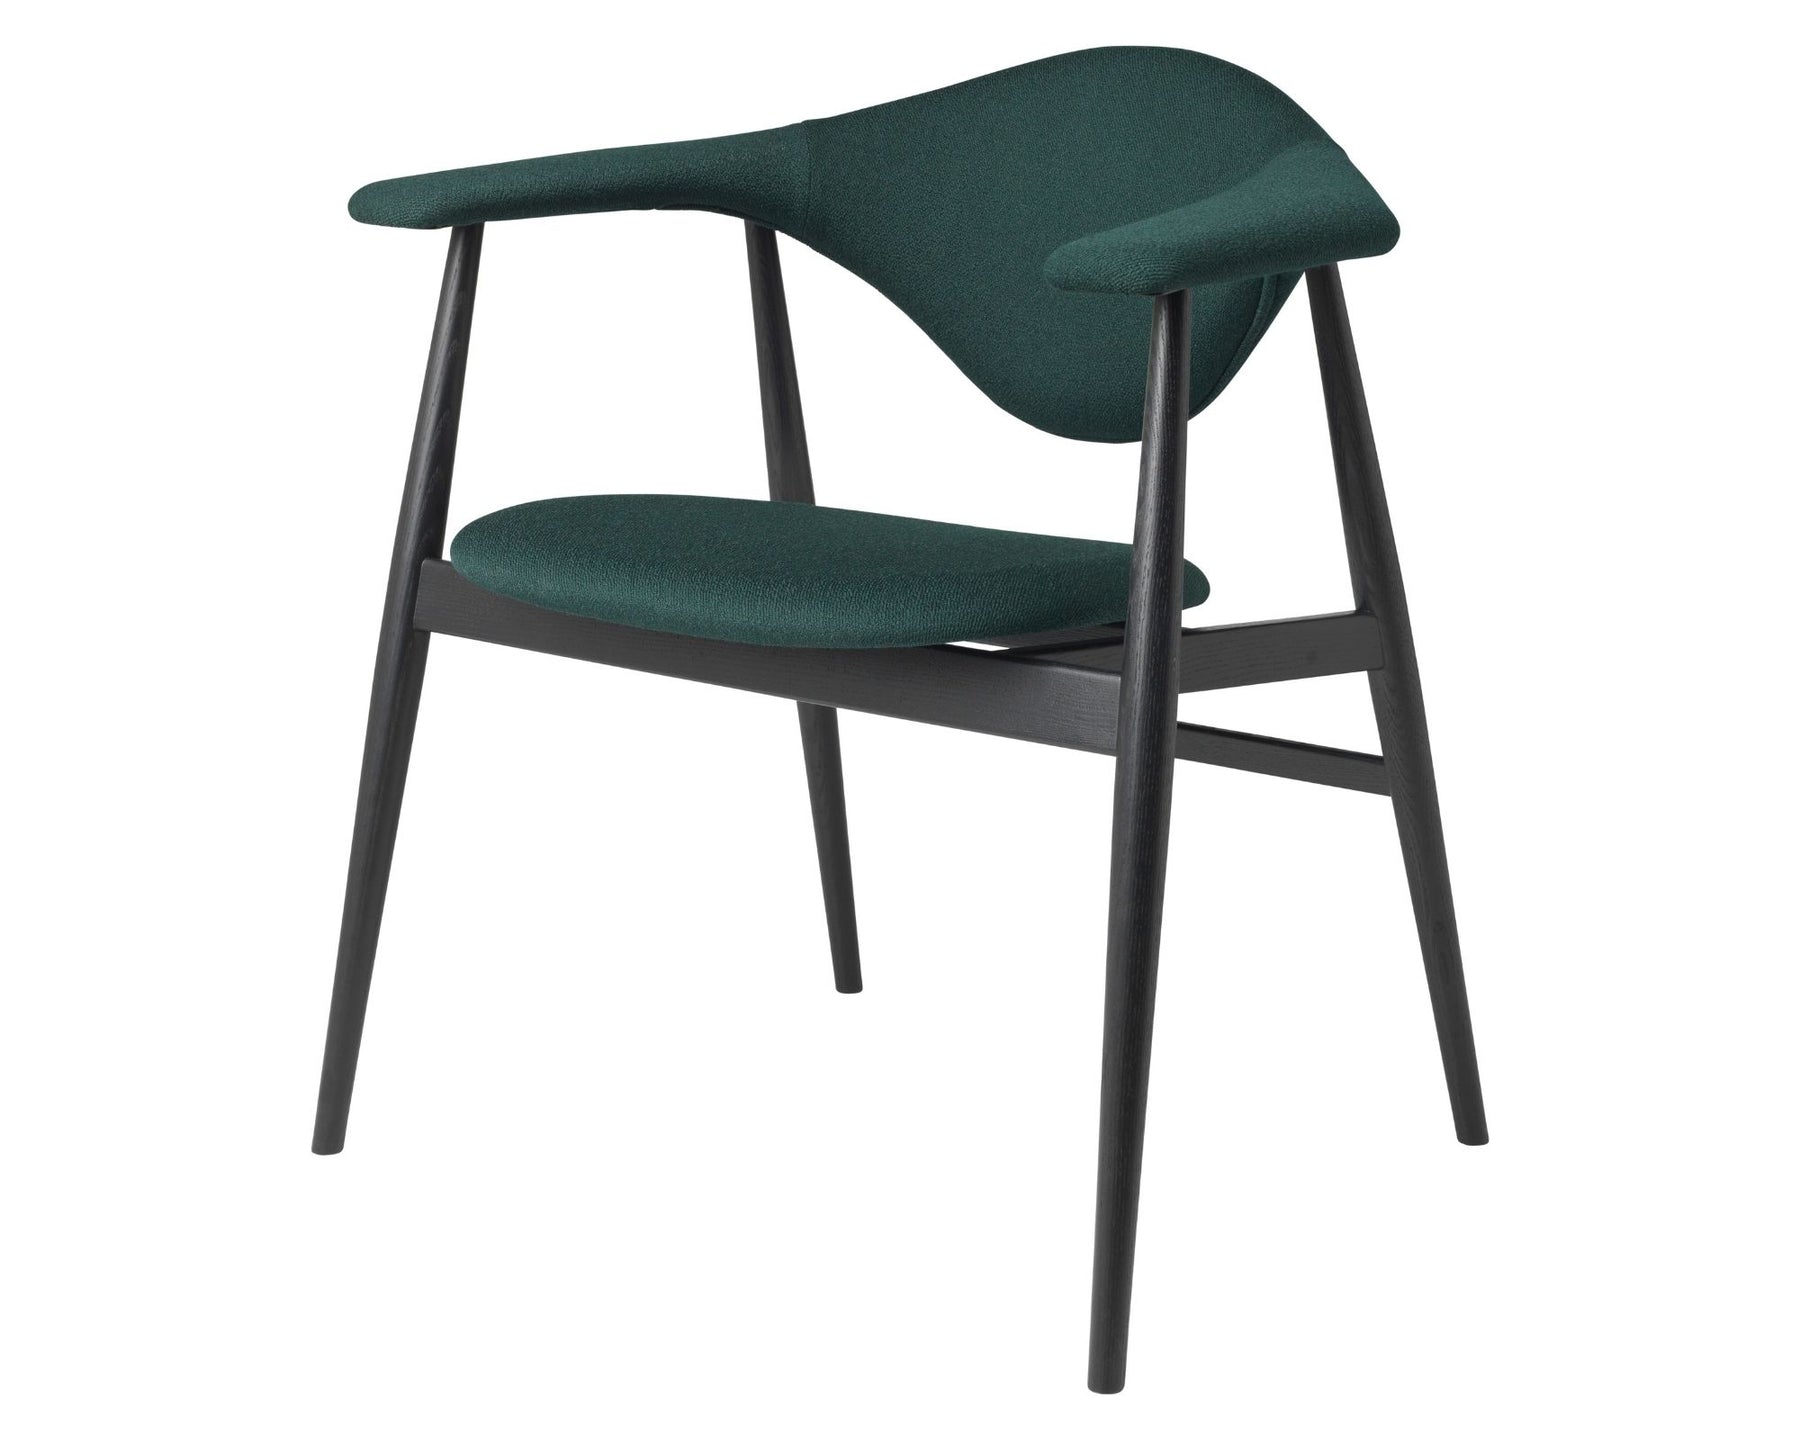 Upholstered Wood Dining Chair | DSHOP